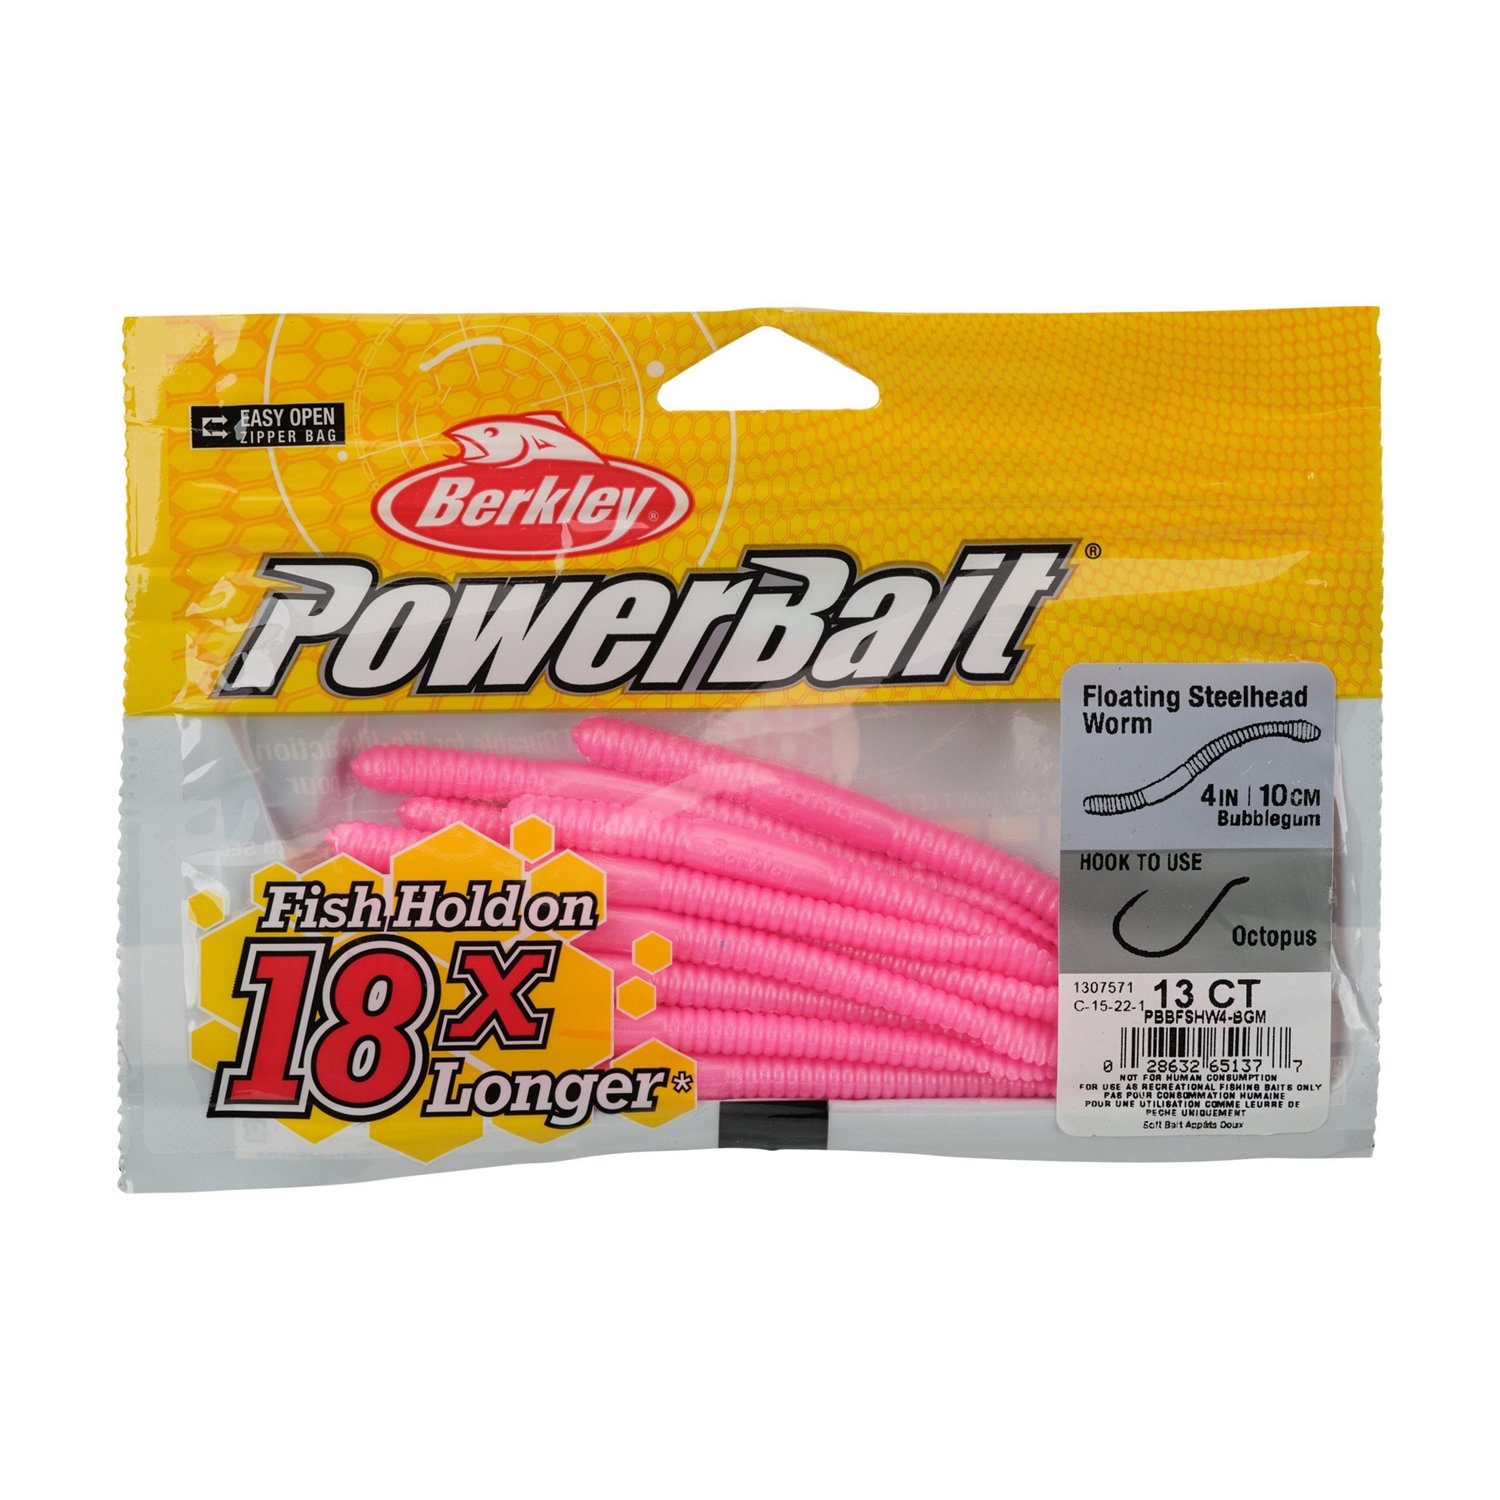 https://academy.scene7.com/is/image/academy//baits---lures/berkley-powerbait-4-in-floating-steelhead-worms-13-pack-pbbfshw4-bgm-pink/0e1f2853f646479d83018b2777e71e3a